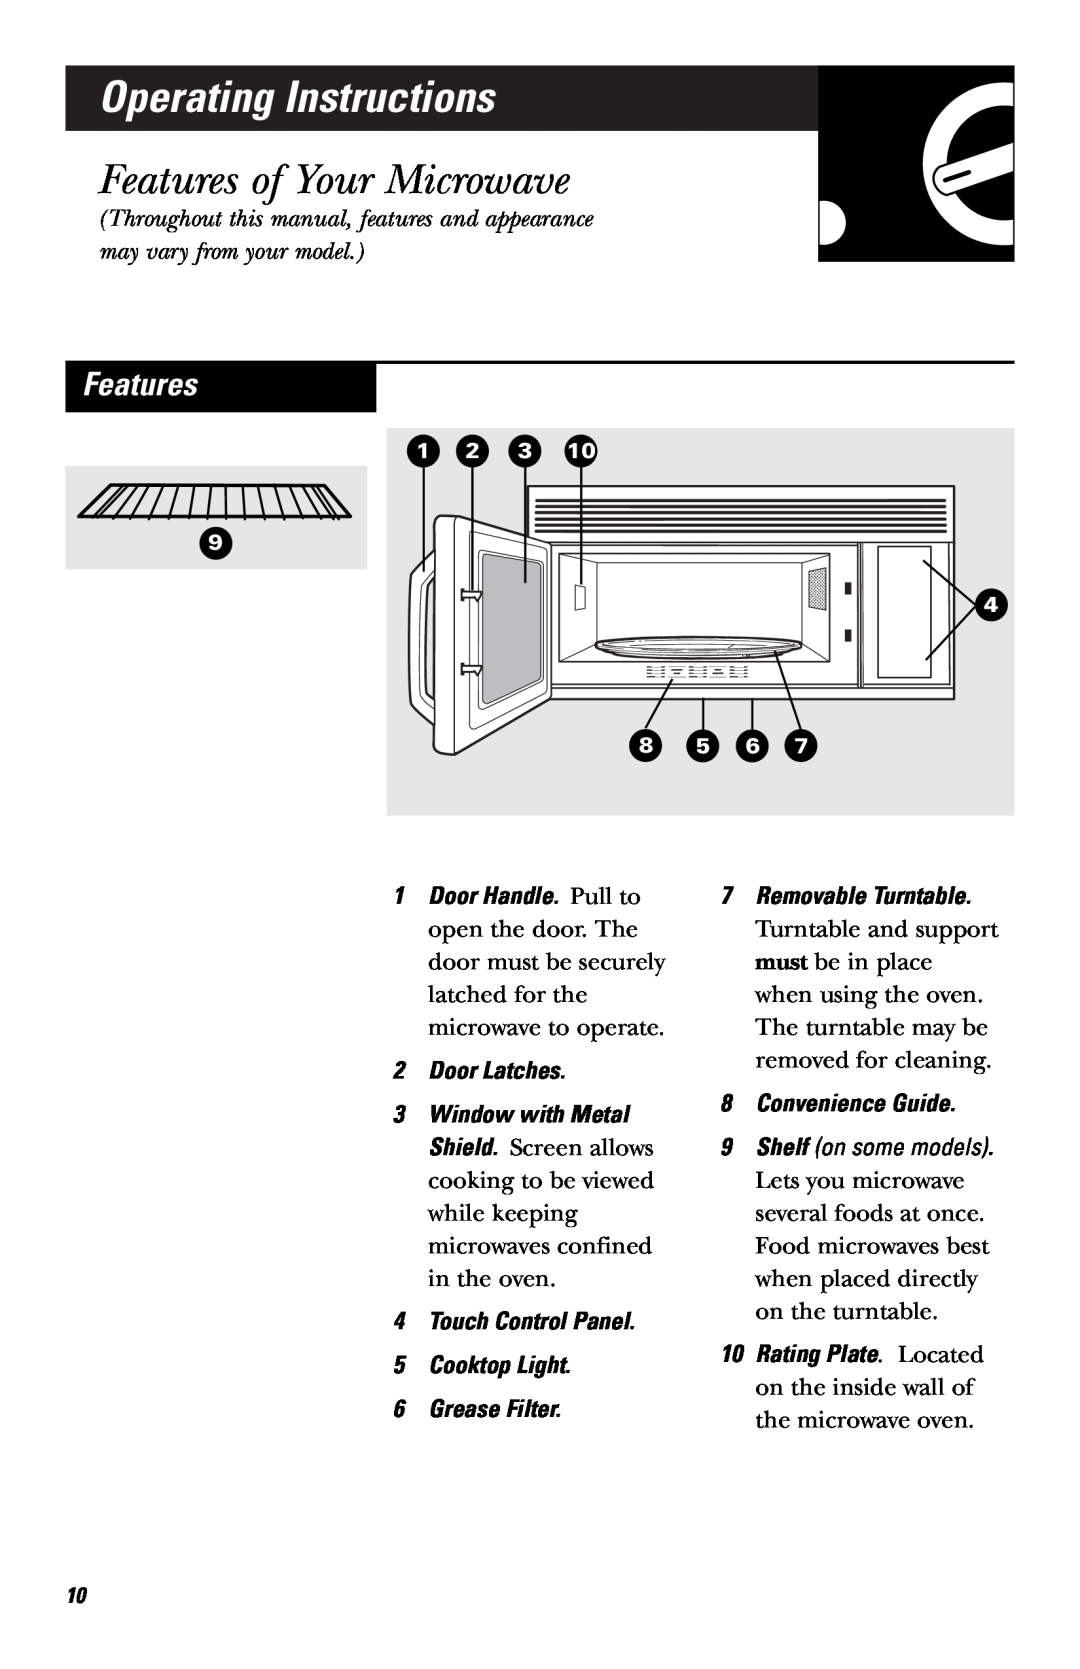 GE LVM1540 Operating Instructions, Features of Your Microwave, Door Latches, Removable Turntable, Convenience Guide 